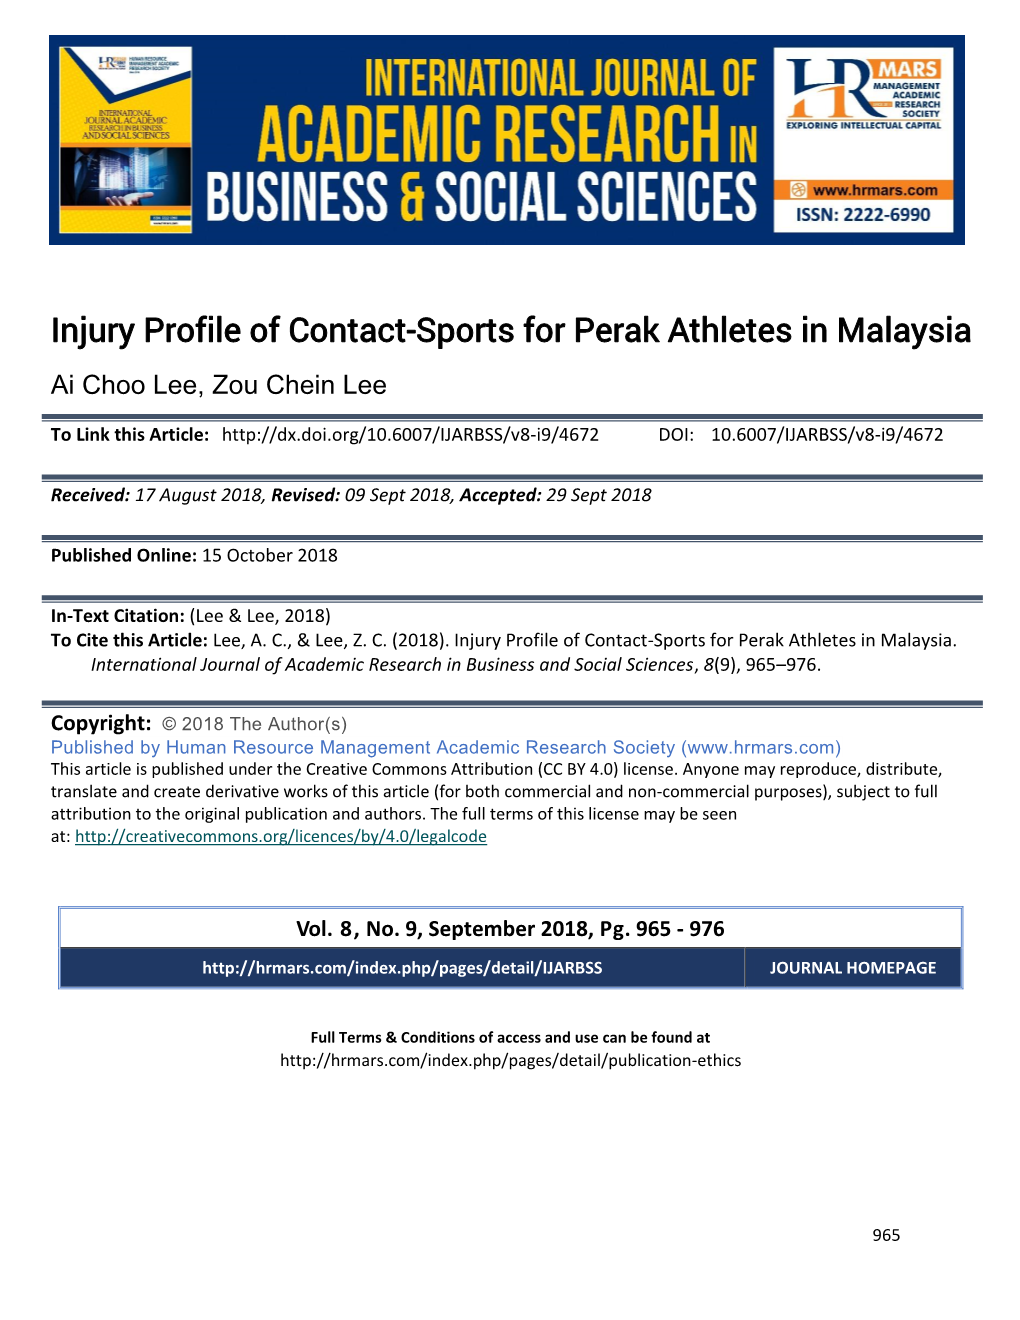 Injury Profile of Contact-Sports for Perak Athletes in Malaysia